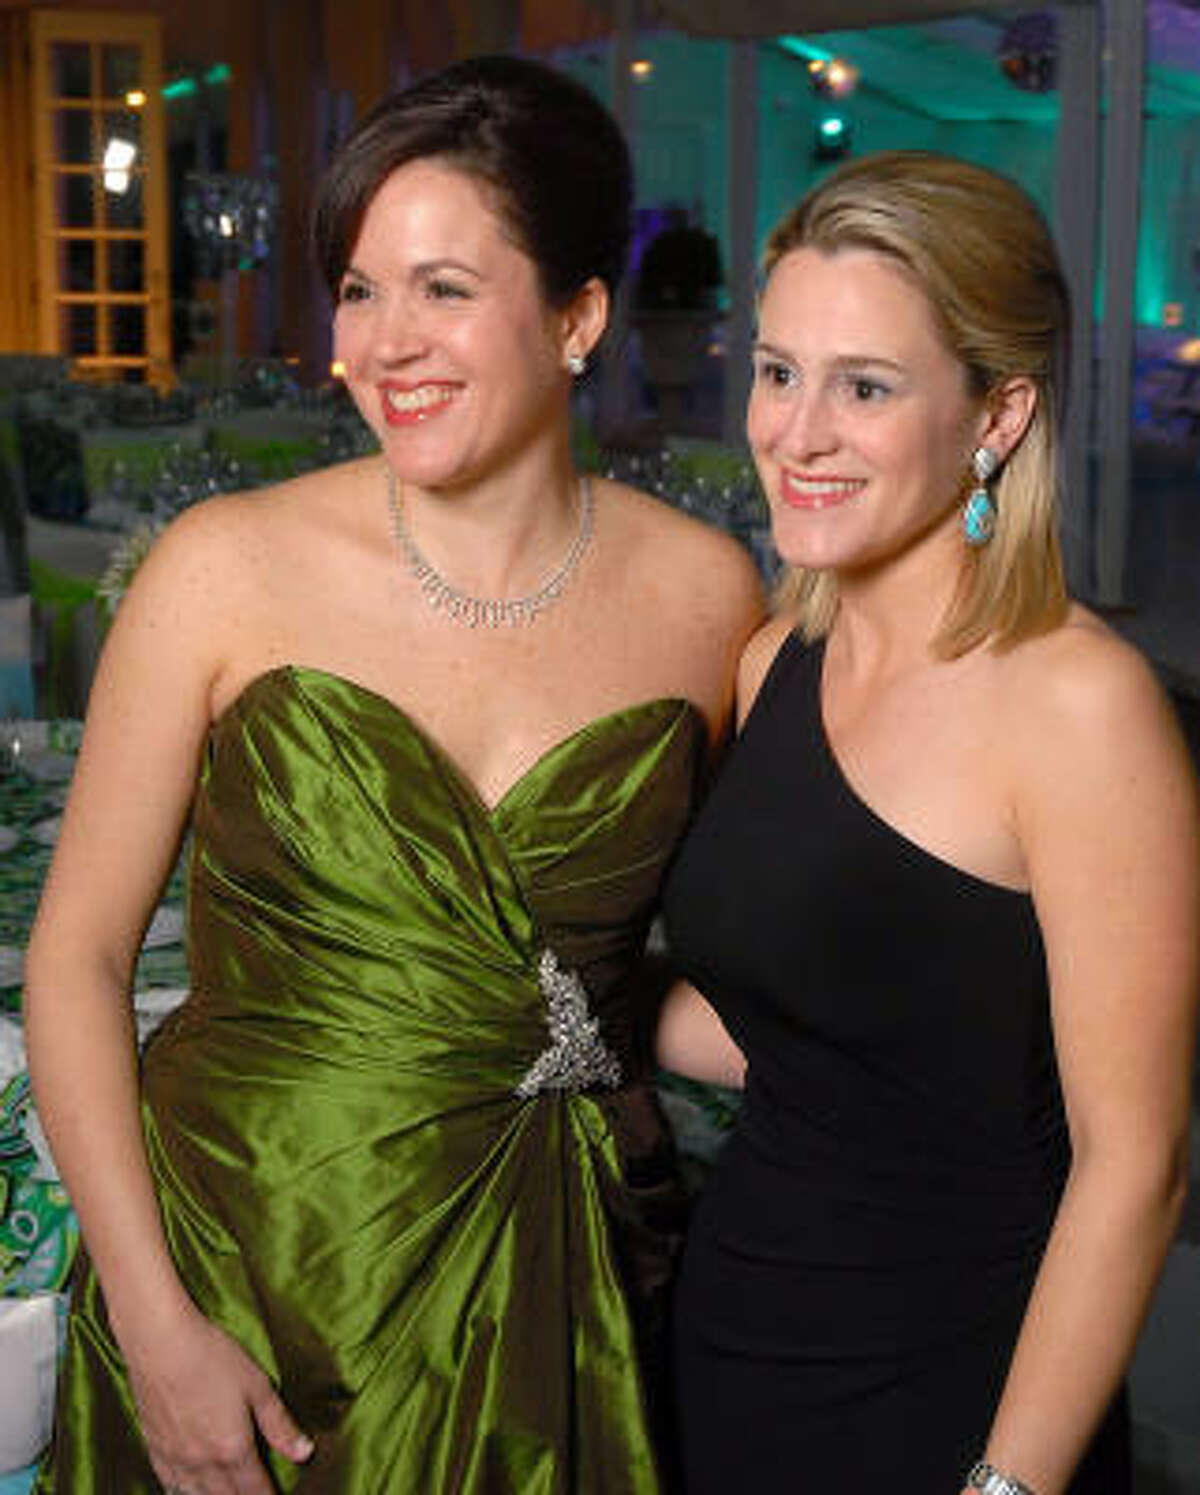 Mary Eliza Shaper, left, and Mary Louise Kinder at the Junior League Charity Ball at the Junior League of Houston.